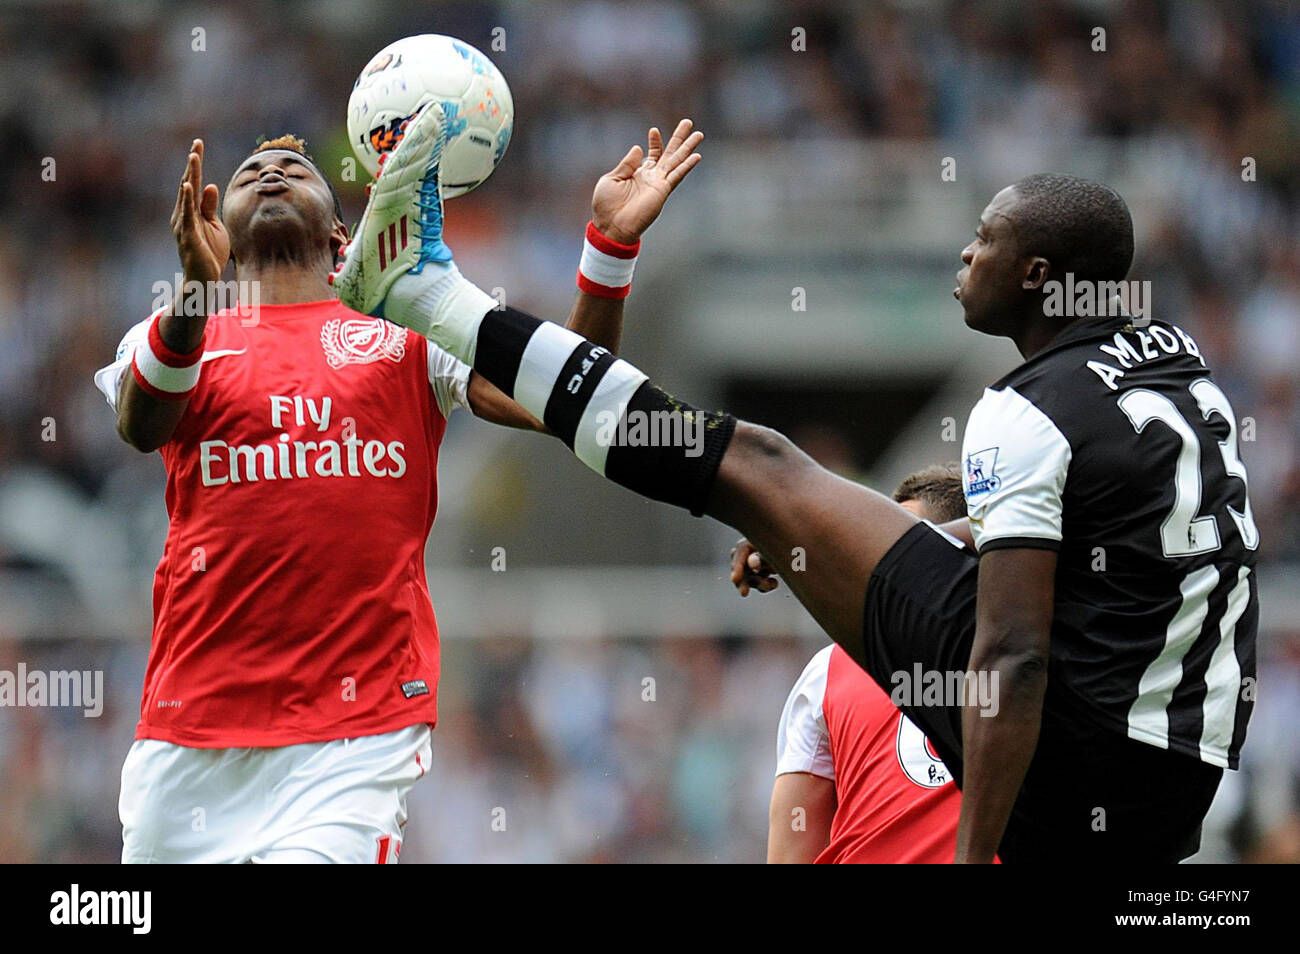 Arsenal's Alex Song (left) and Newcastle United's Shola Ameobi (right) battle for the ball during the Barclays Premier League match at St James' Park, Newcastle. Stock Photo